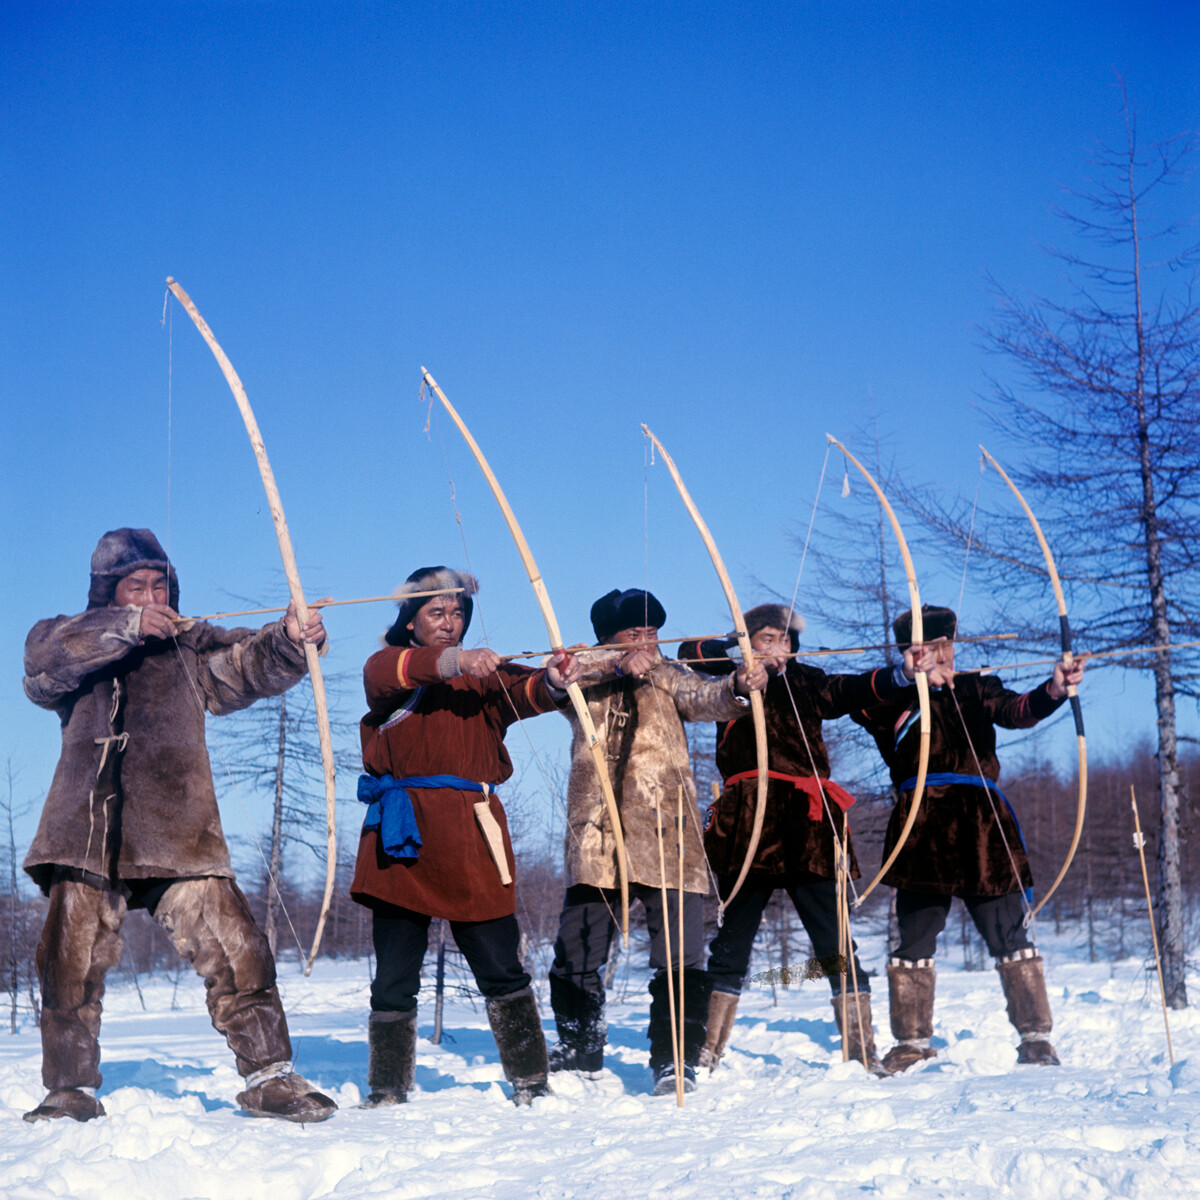 Competition in archery among the Nivkh, 1970, Sakhalin.